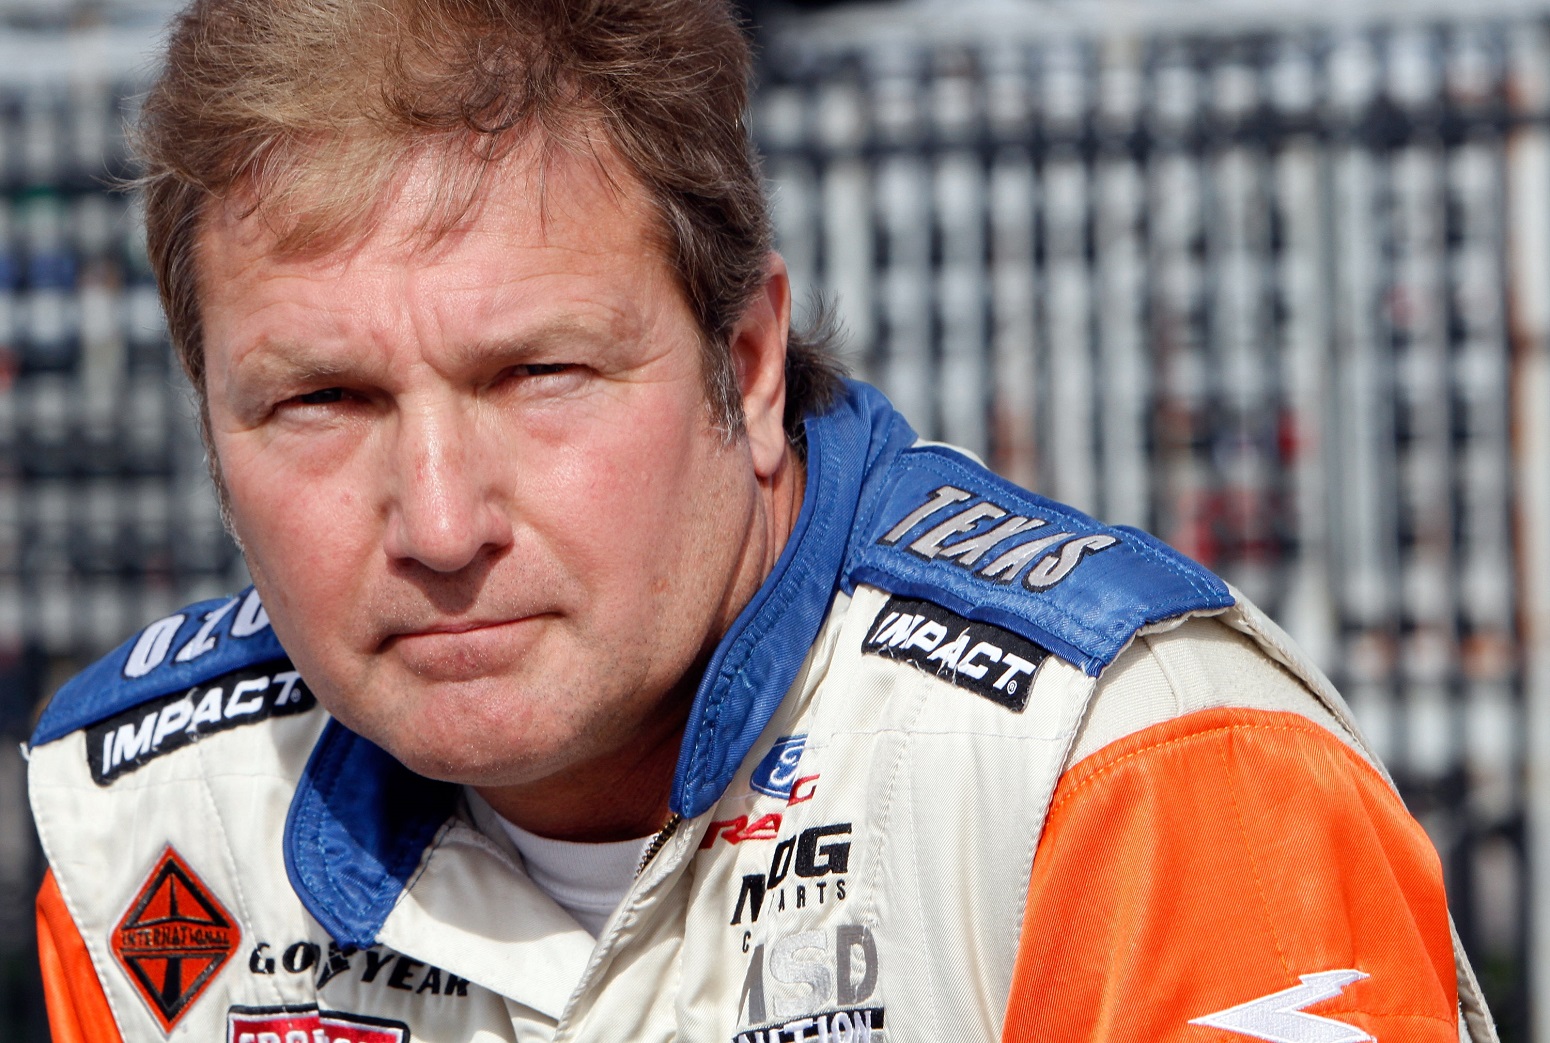 Former NASCAR Driver Rick Crawford Is Serving 11 Years in Prison After Attempting a Sex Crime